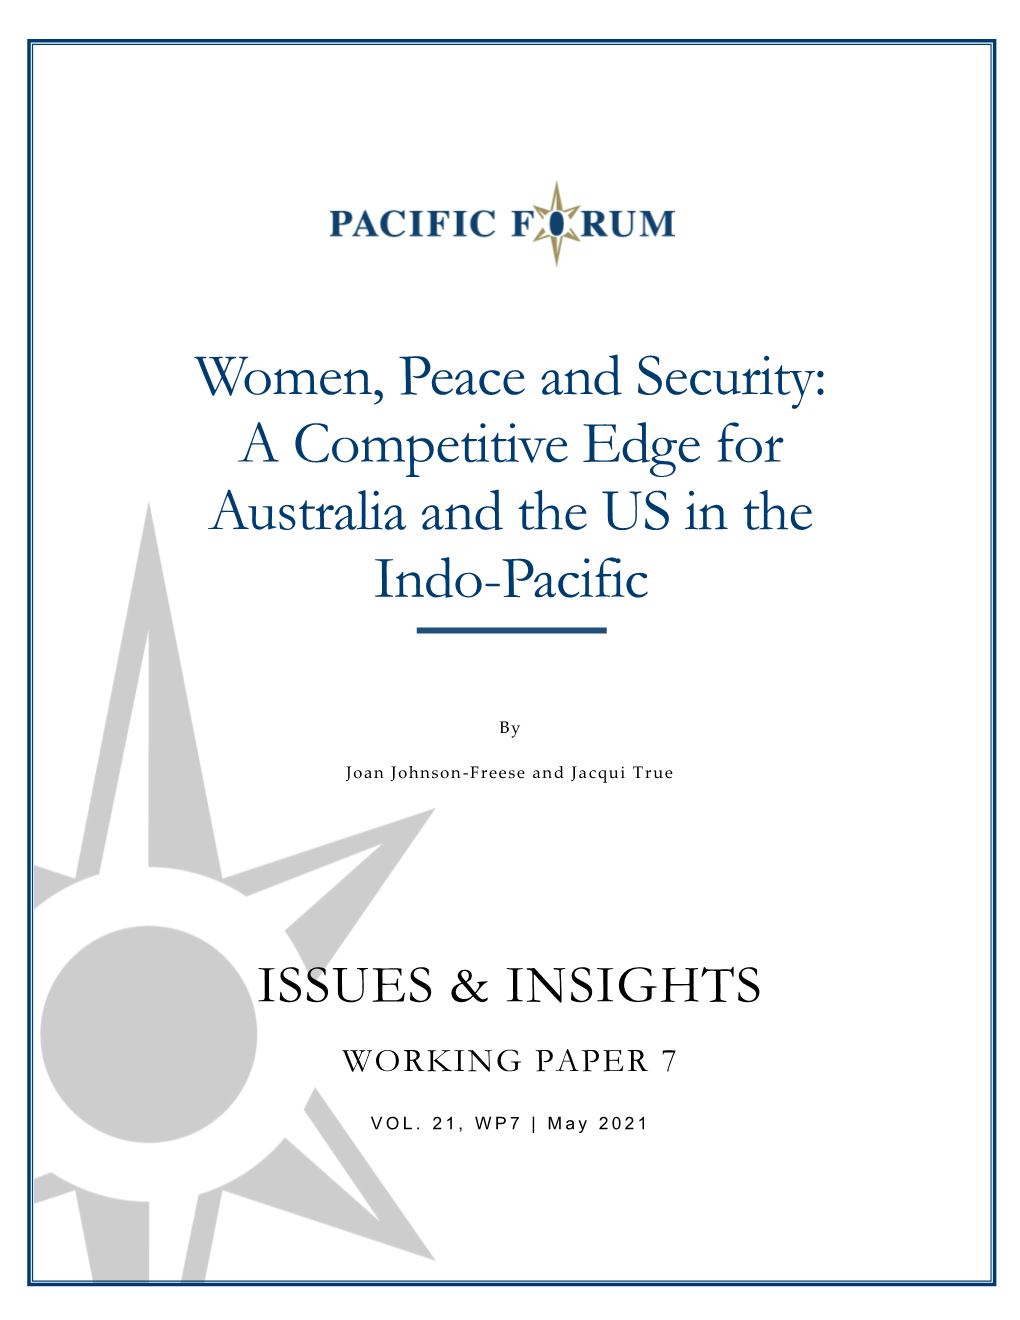 Women, Peace and Security: a Competitive Edge for Australia and the US in the Indo-Pacific